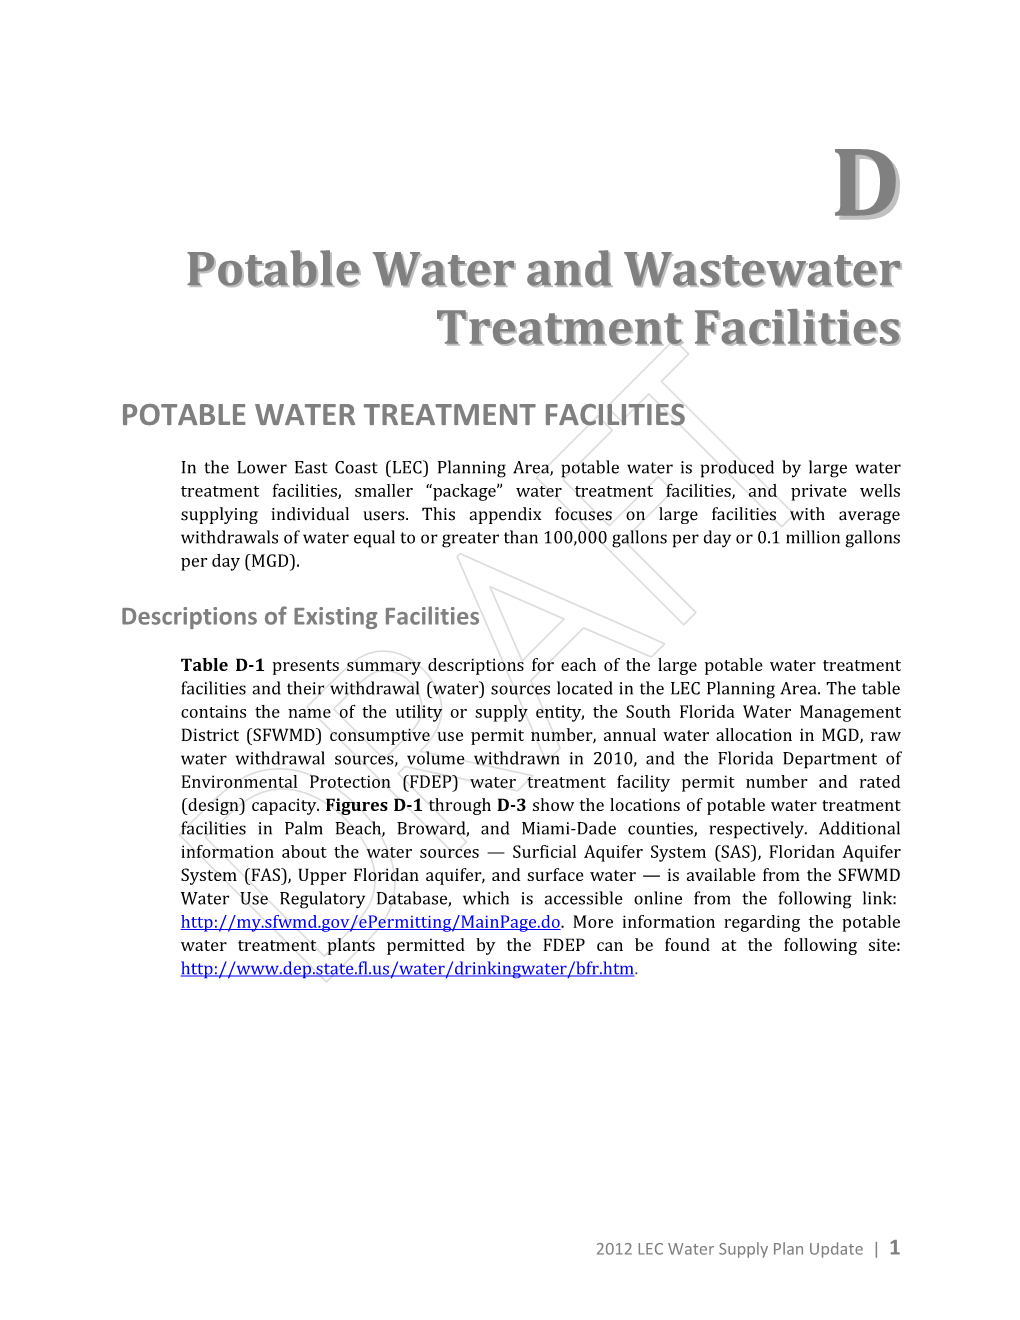 Potable Water and Wastewater Treatment Facilities